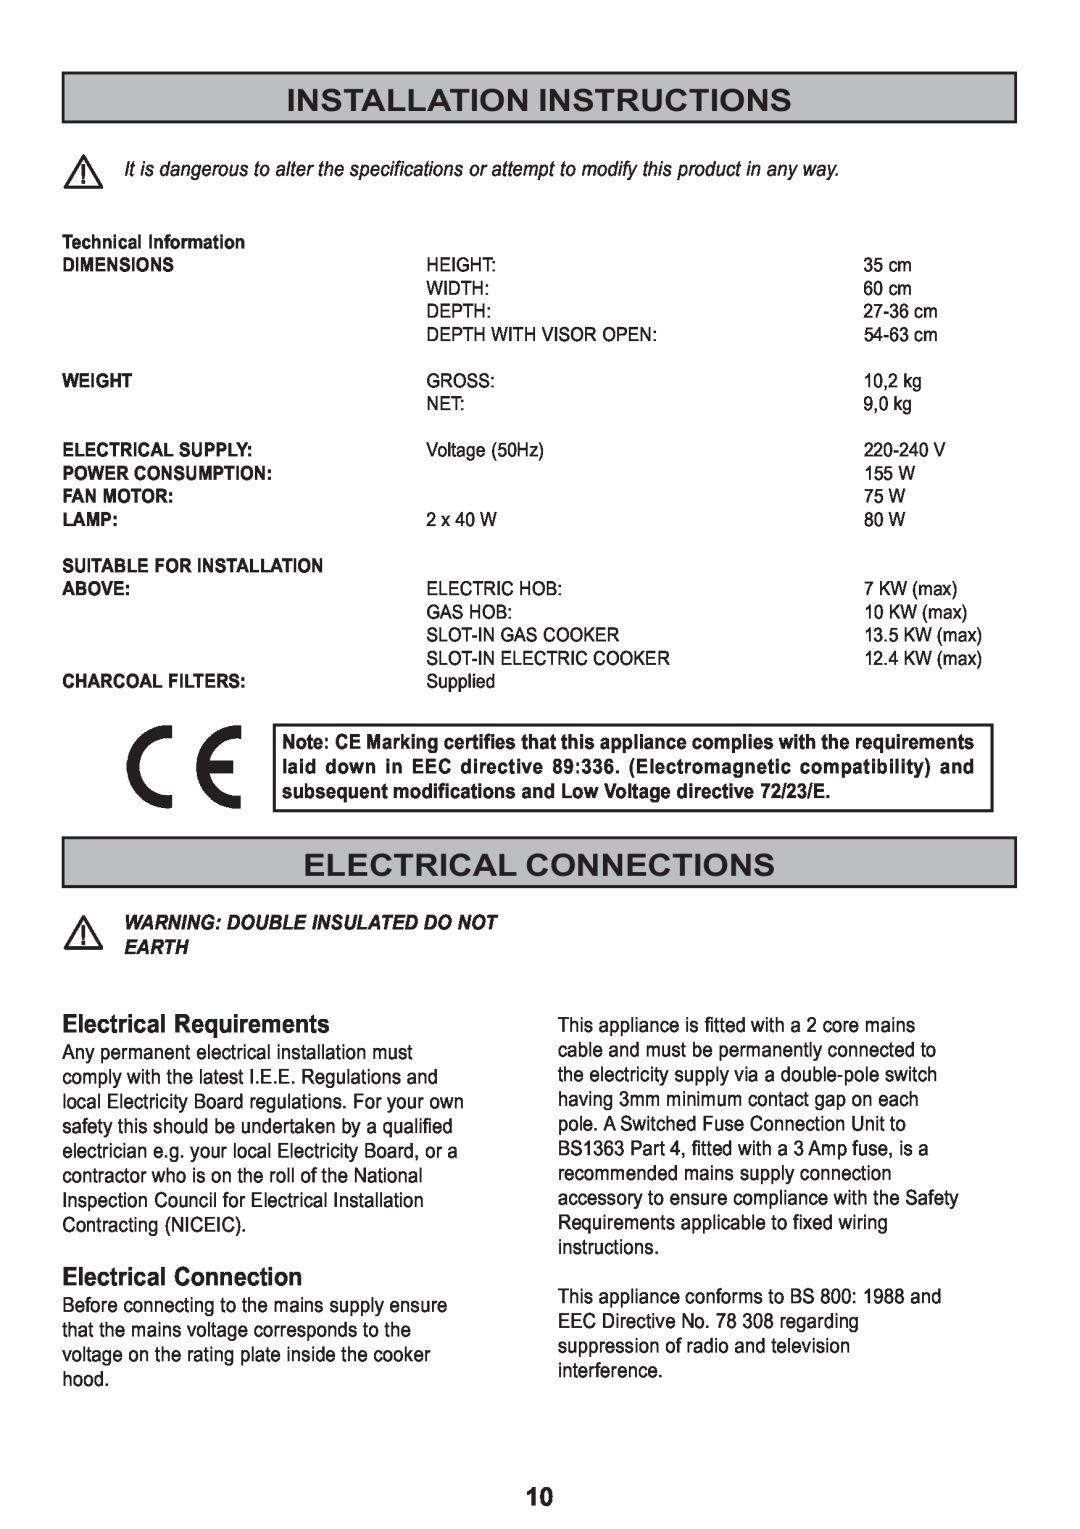 Zanussi ZH 280 manual Installation Instructions, Electrical Connections, Electrical Requirements 